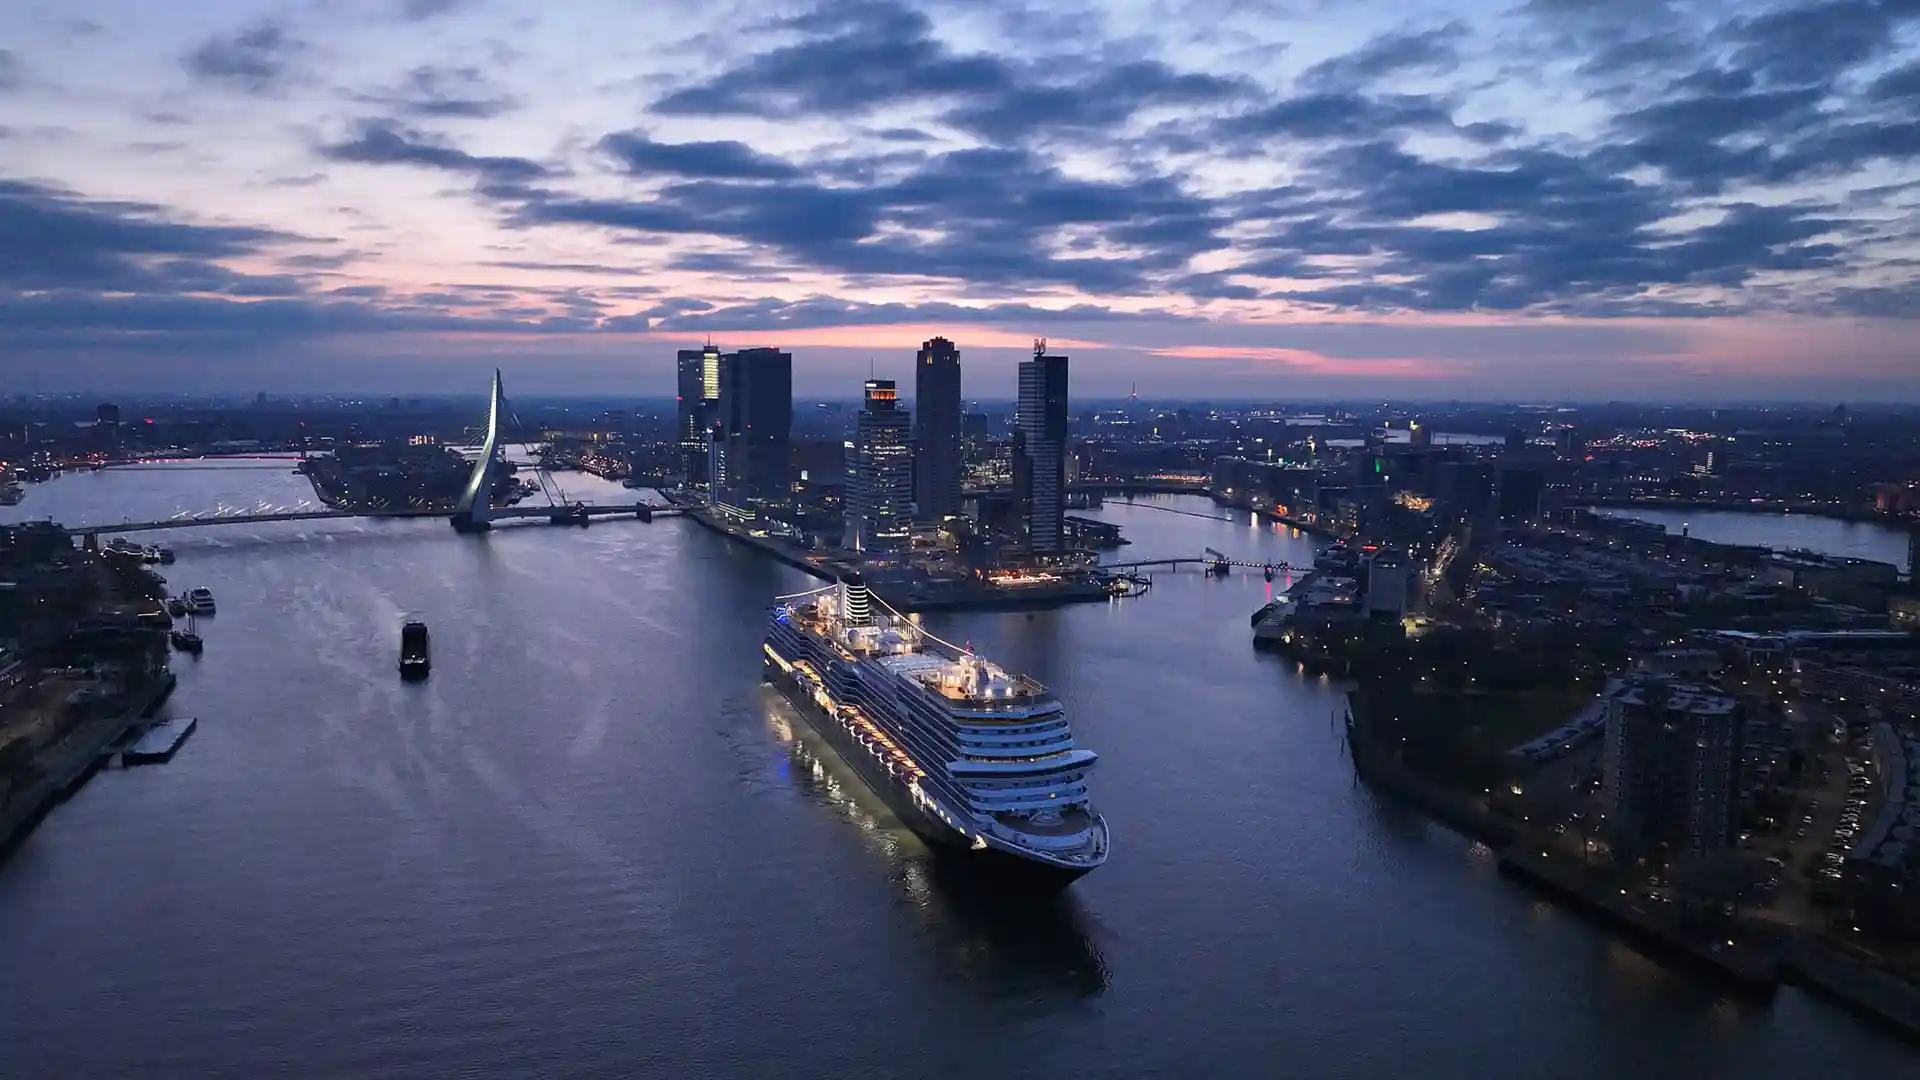 Early morning aerial view of Rotterdam with Holland America Line cruise ship.